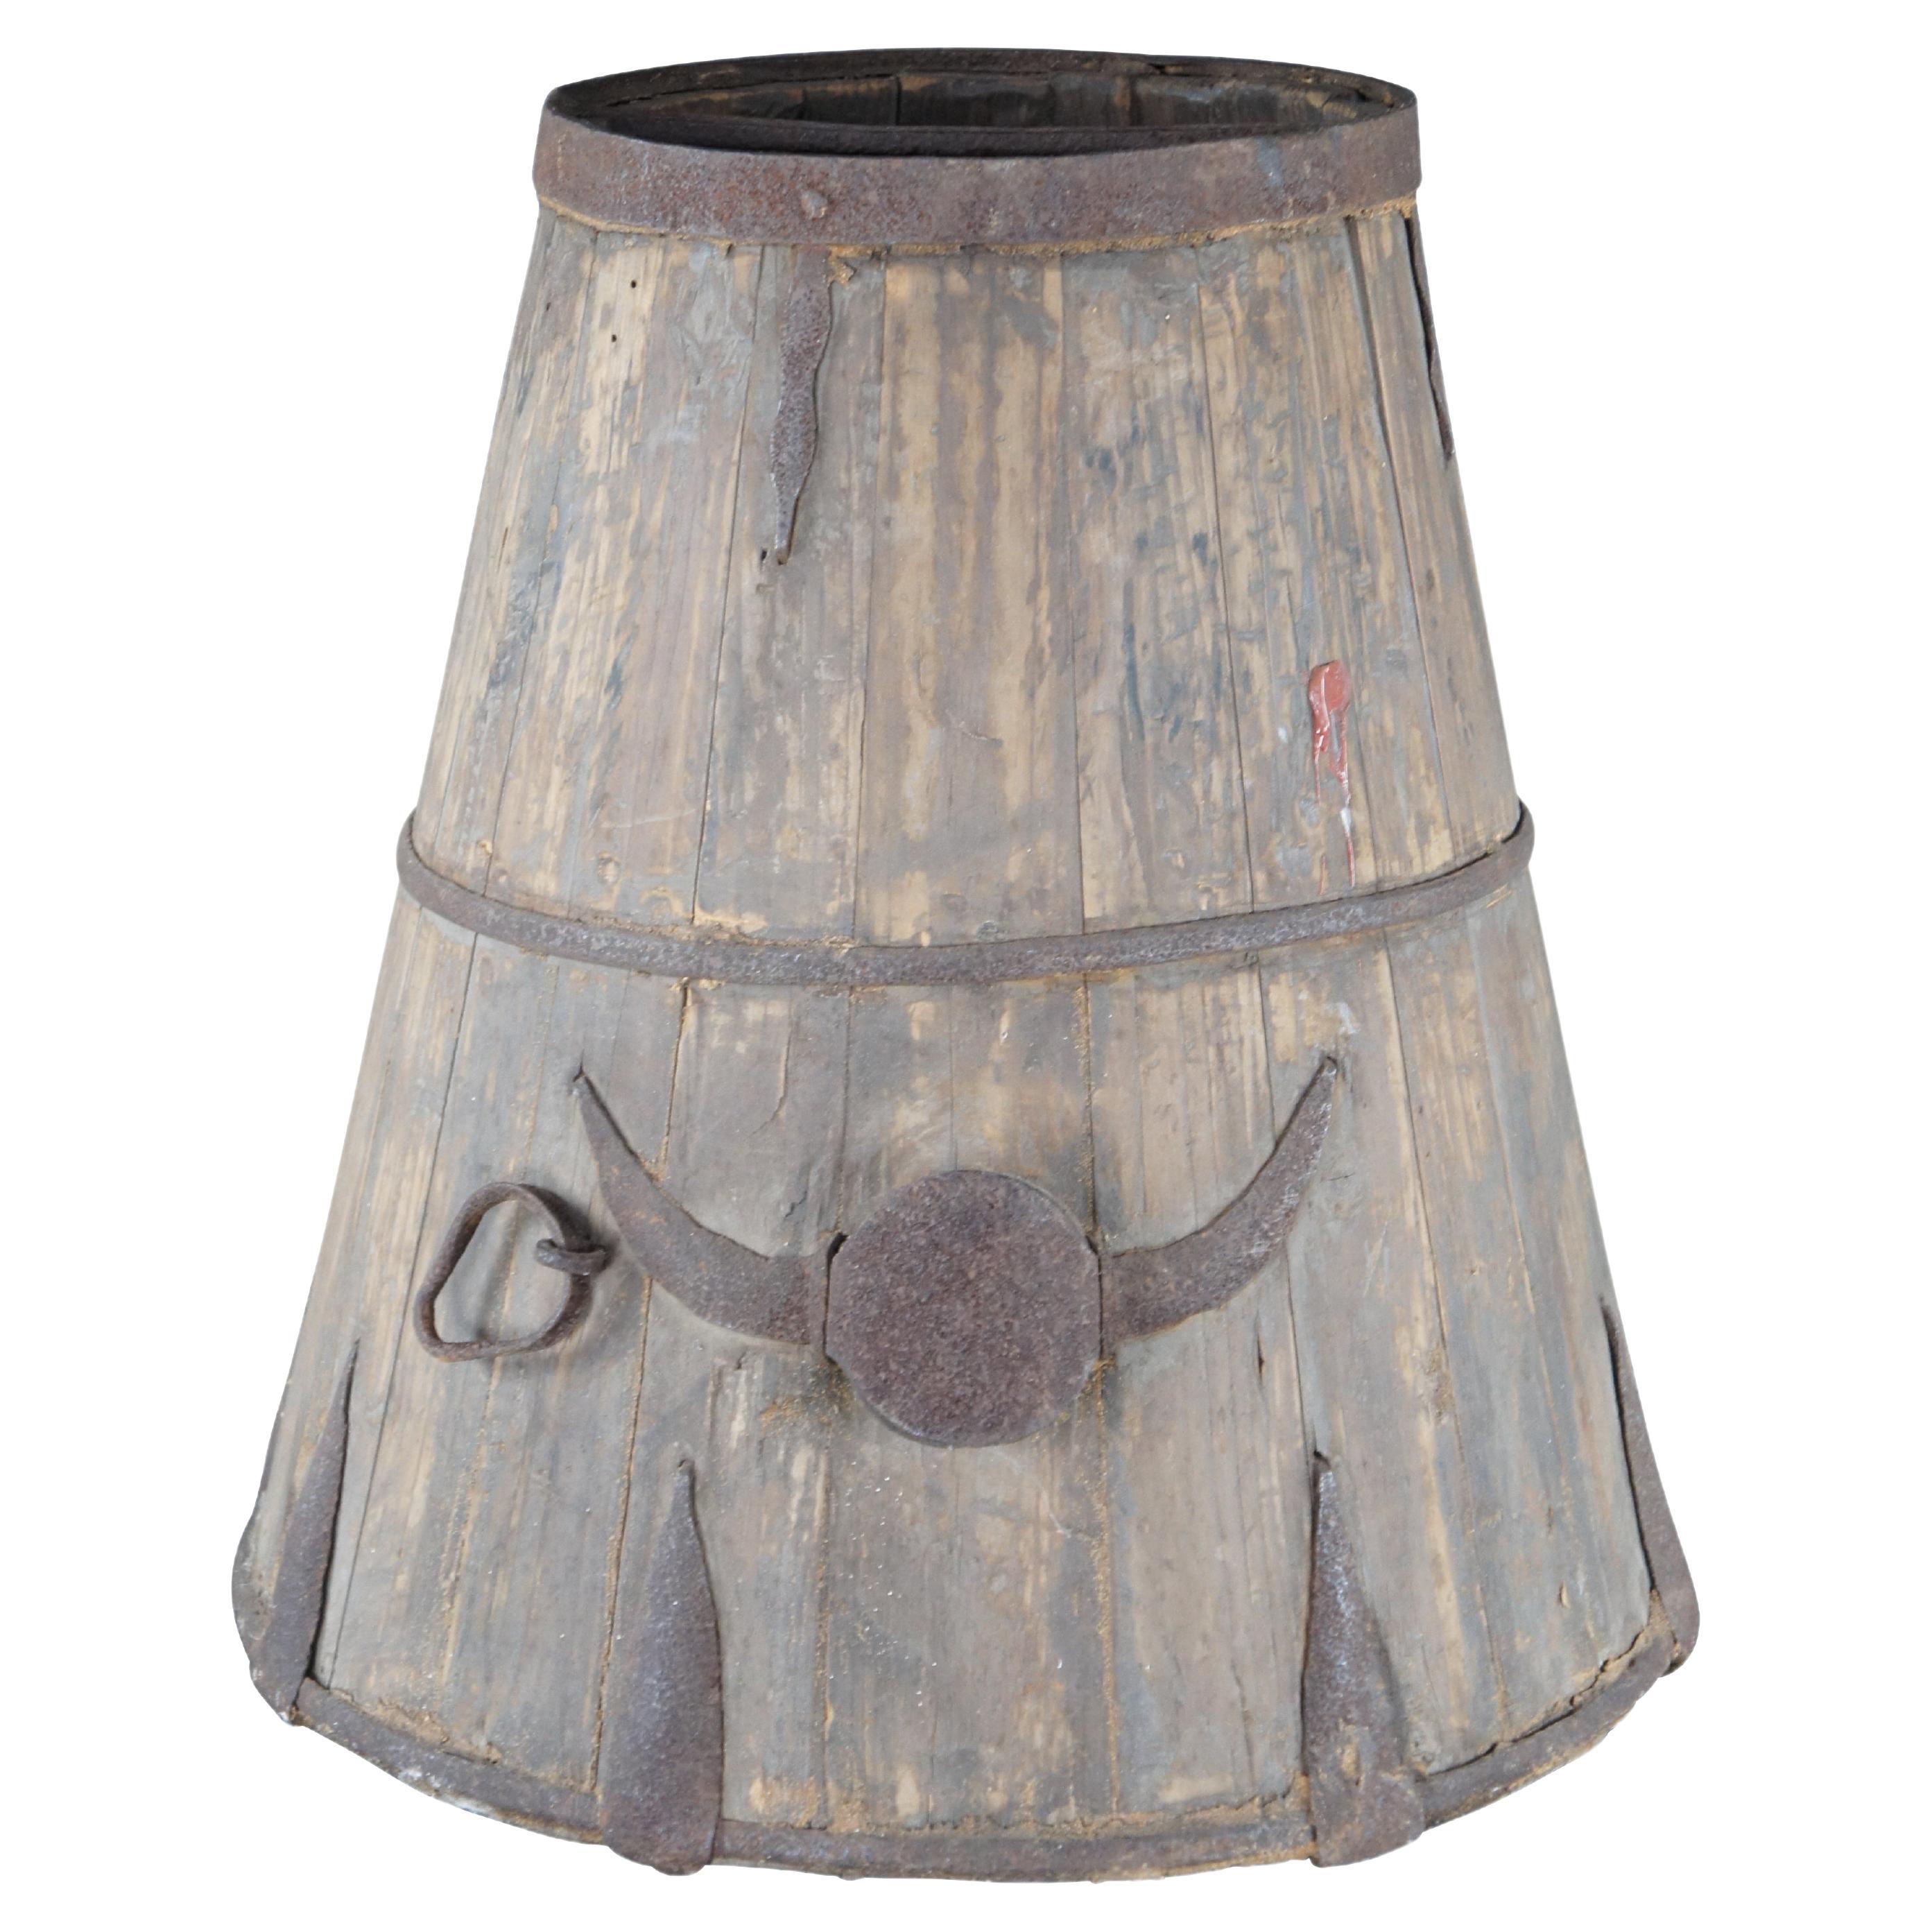 Primitive Chinese Shanxi Banded Iron Barrel Willow Rice Measure Grain Bucket 18" For Sale